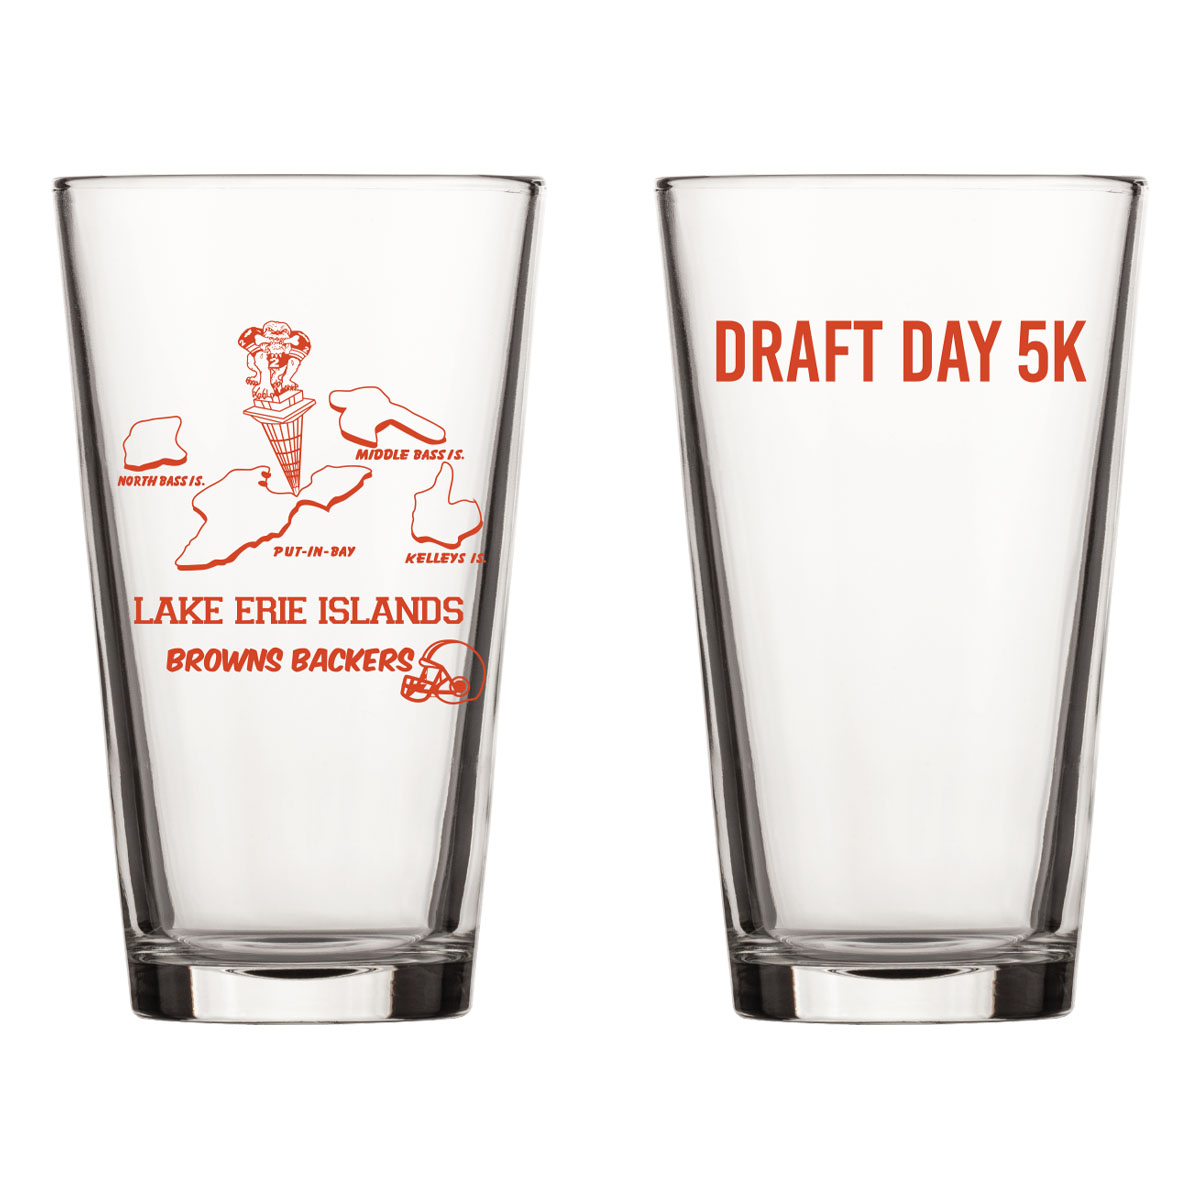 Draft Day 5k Pint Glass For All Participants - Cleveland Browns Pint Glass - Put-in-Bay, Ohio 5k - Lake Erie Islands Browns Backers